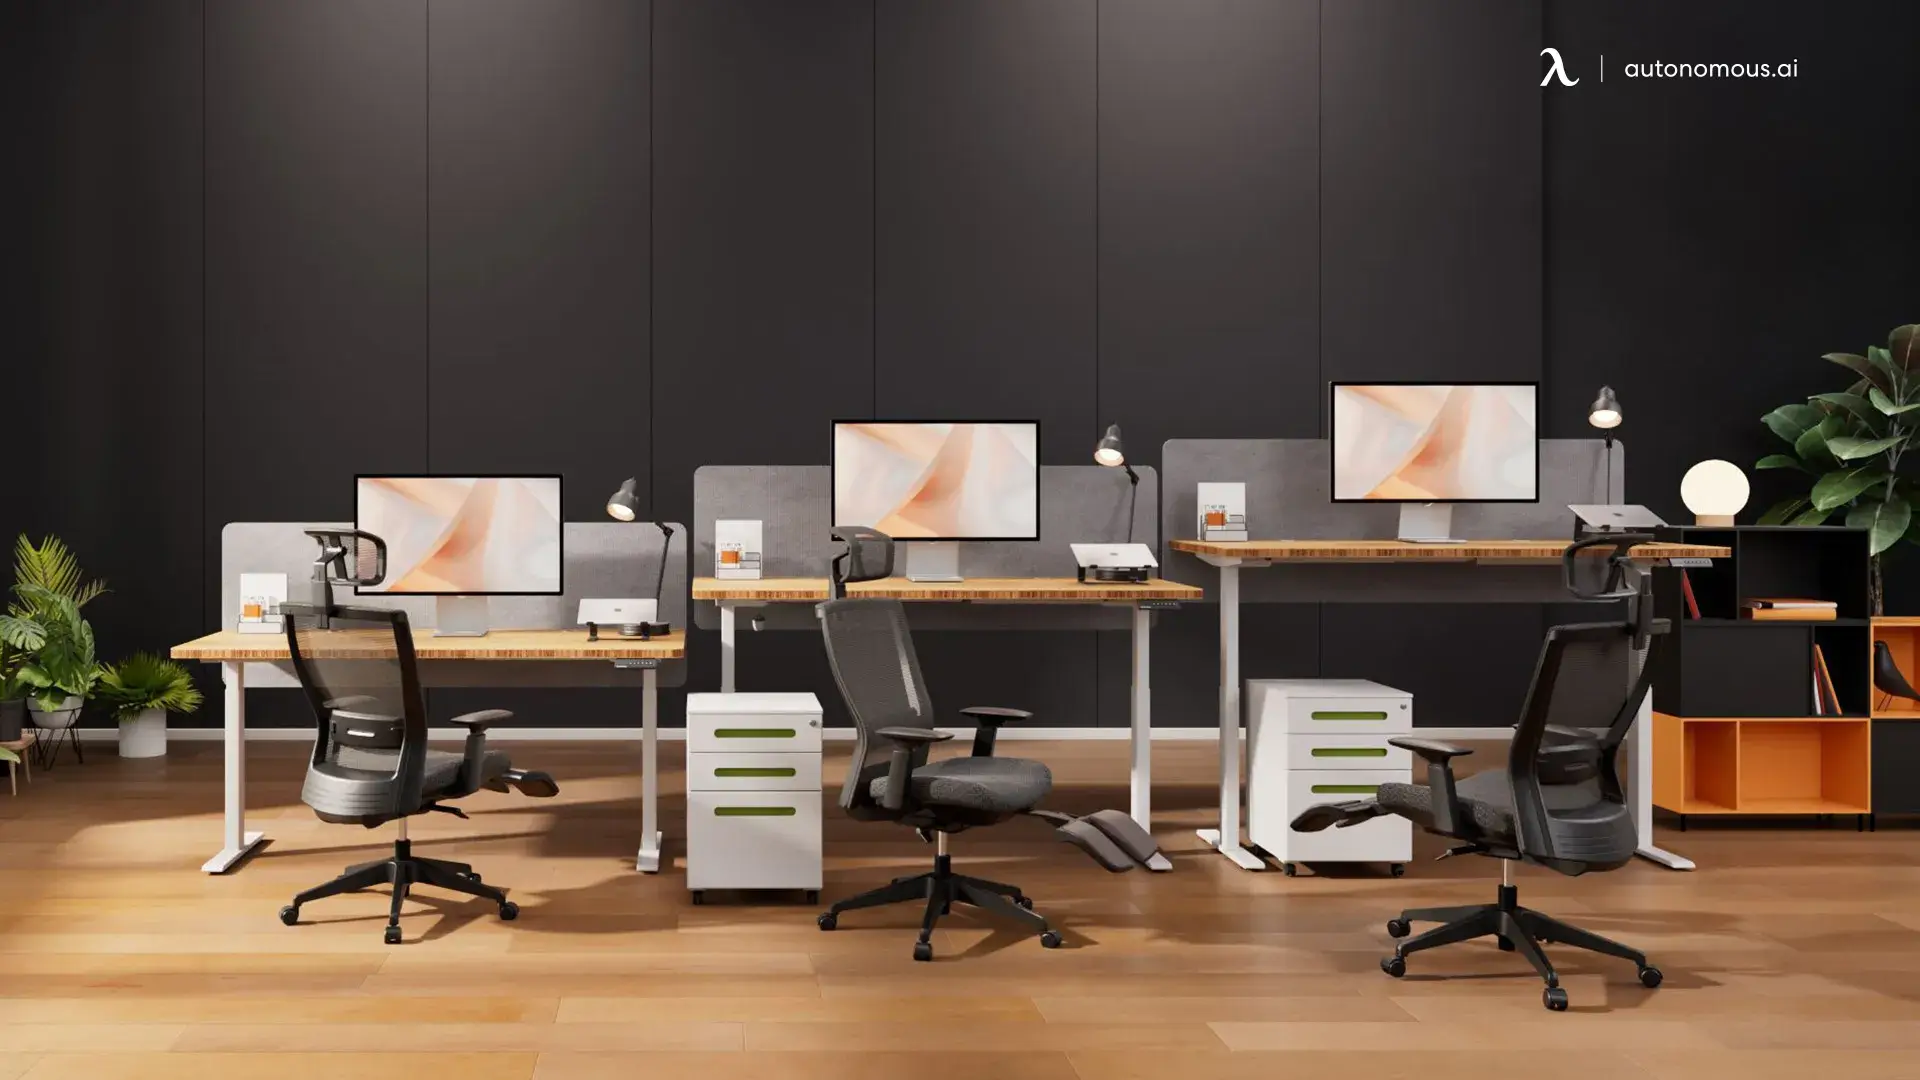 How to Implement Standing Desks and Ergonomic Chairs in Modular Office Cubicles